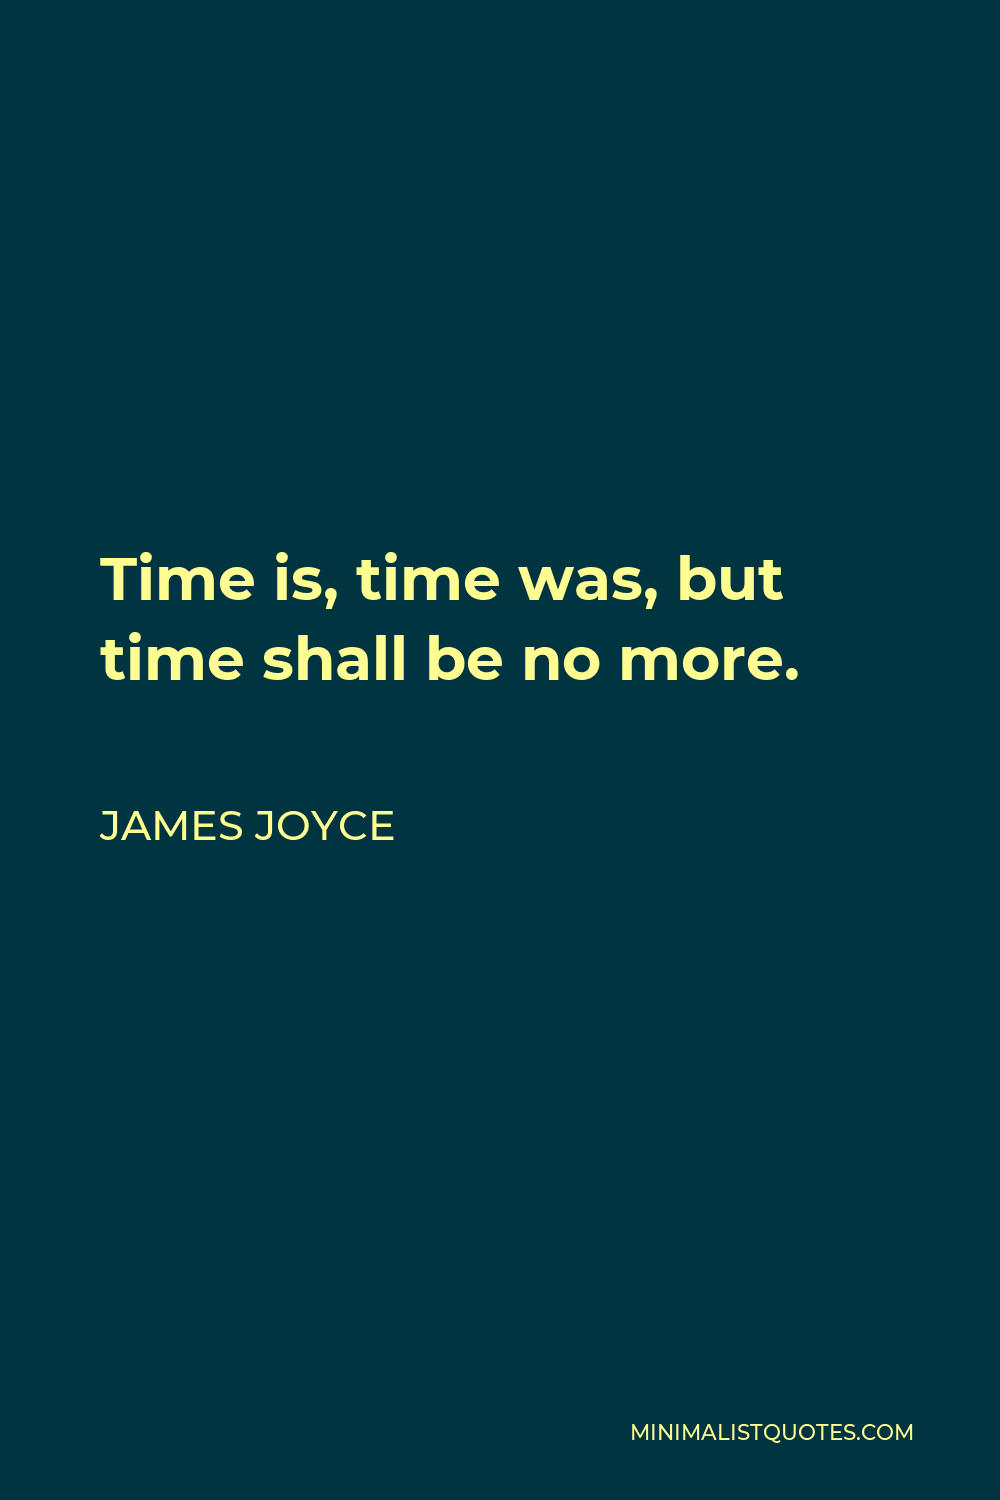 James Joyce Quote - Time is, time was, but time shall be no more.